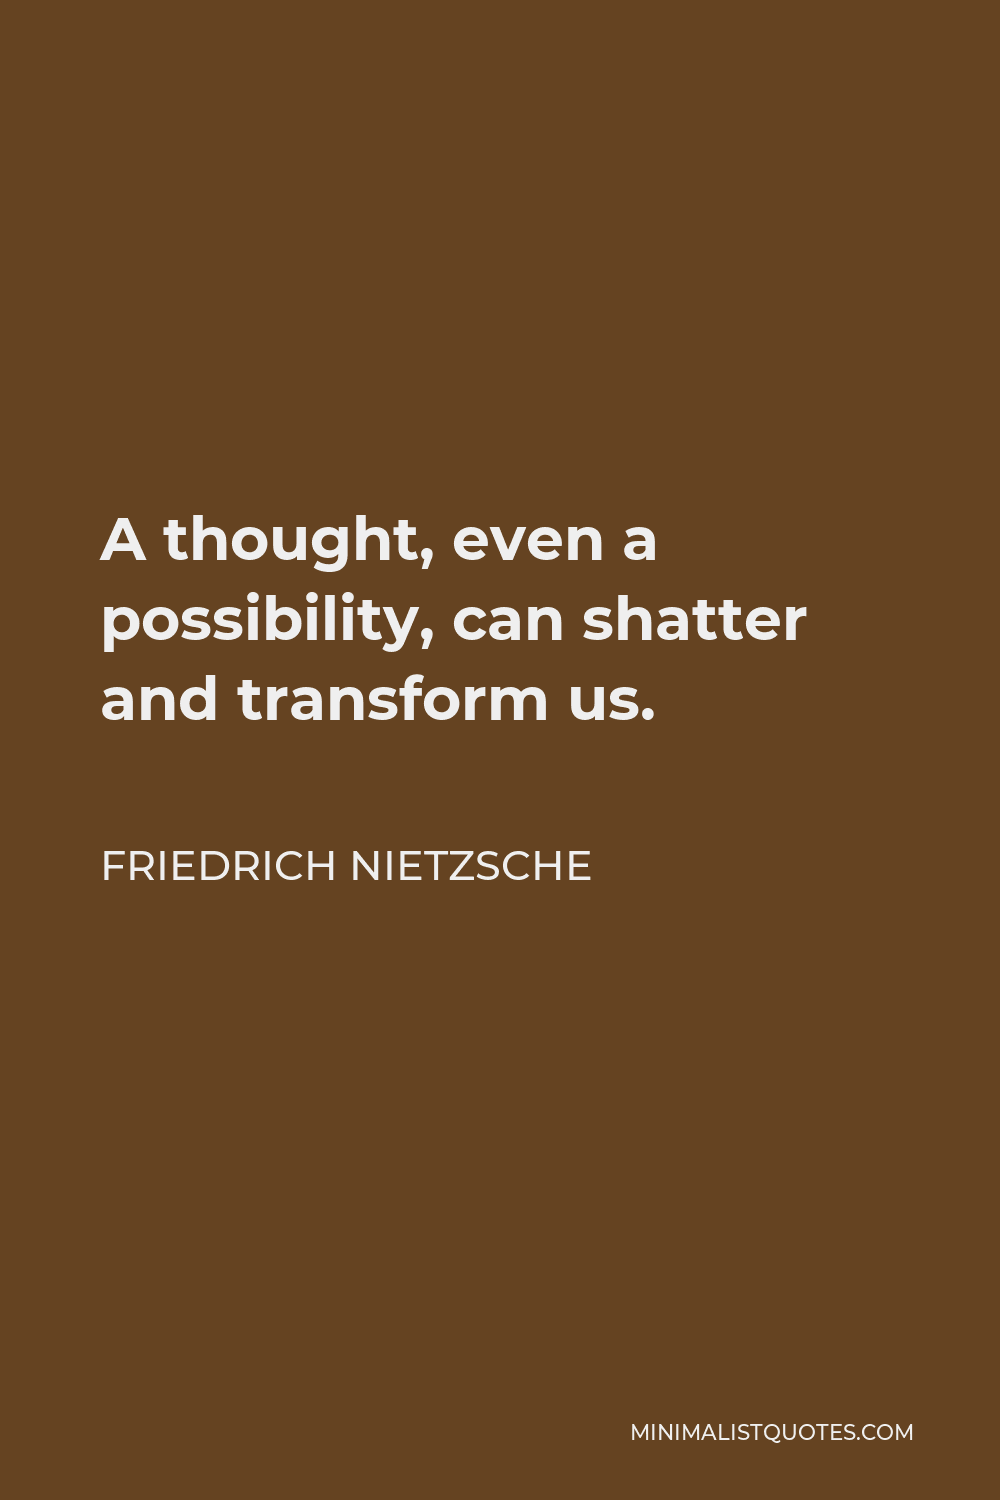 Friedrich Nietzsche Quote - A thought, even a possibility, can shatter and transform us.